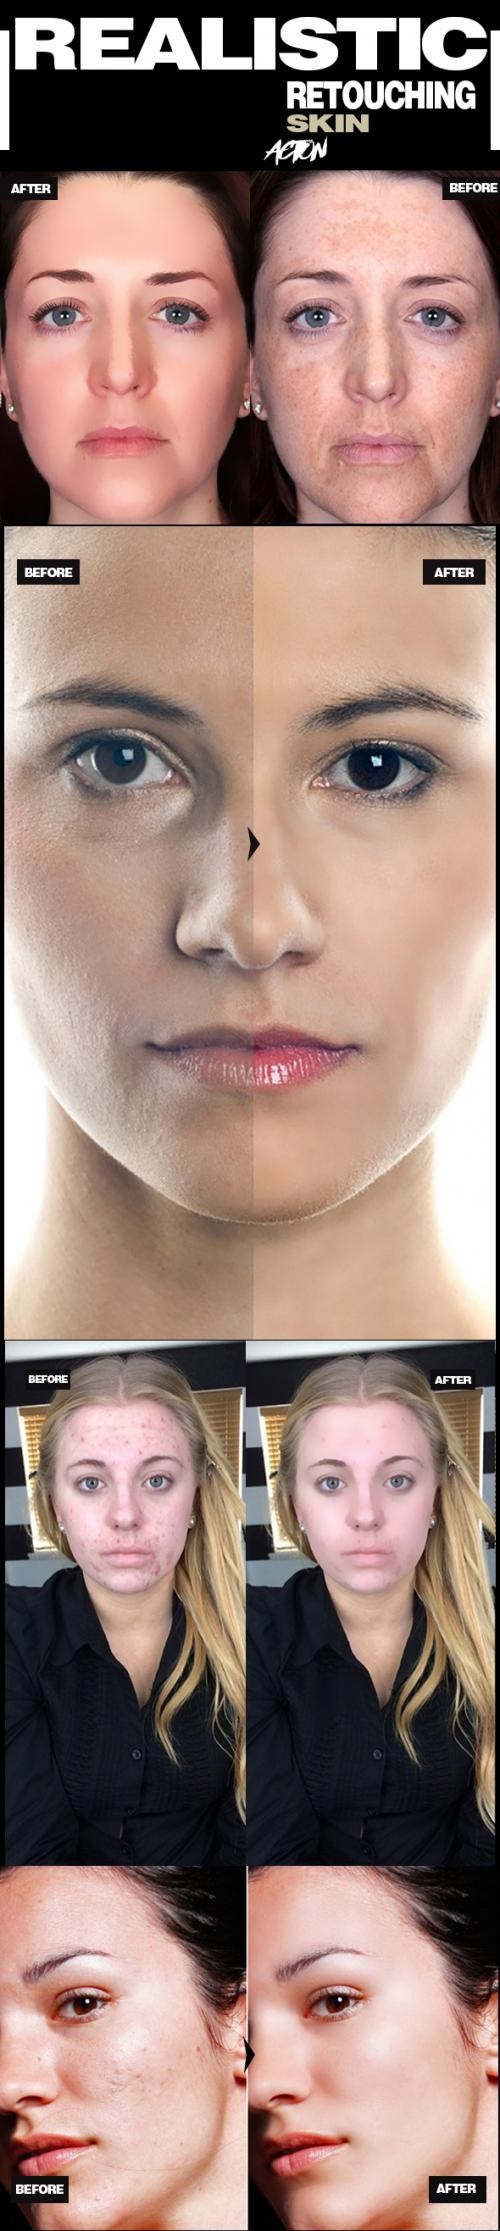 Realistic Skin Photoshop Action - 20100972